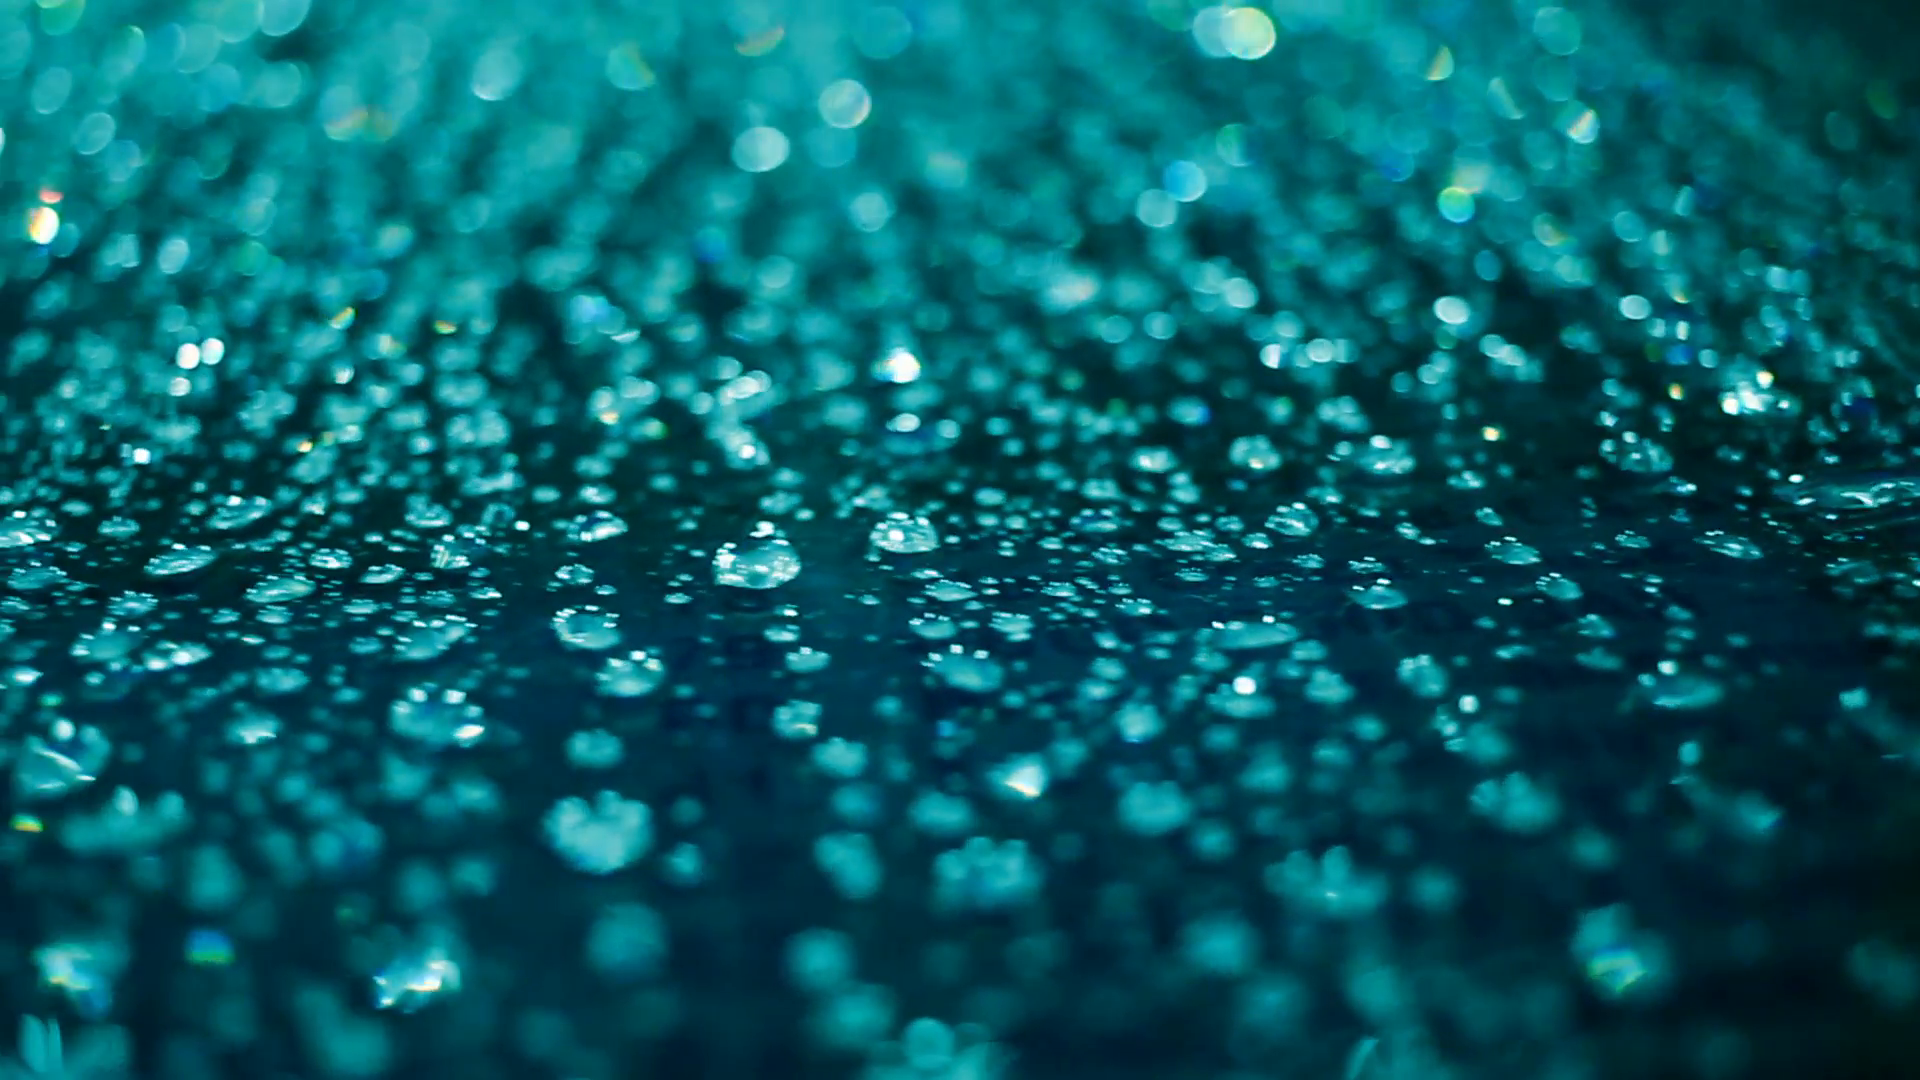 Droplets on glass at night. Closeup of water drops on glass after ...